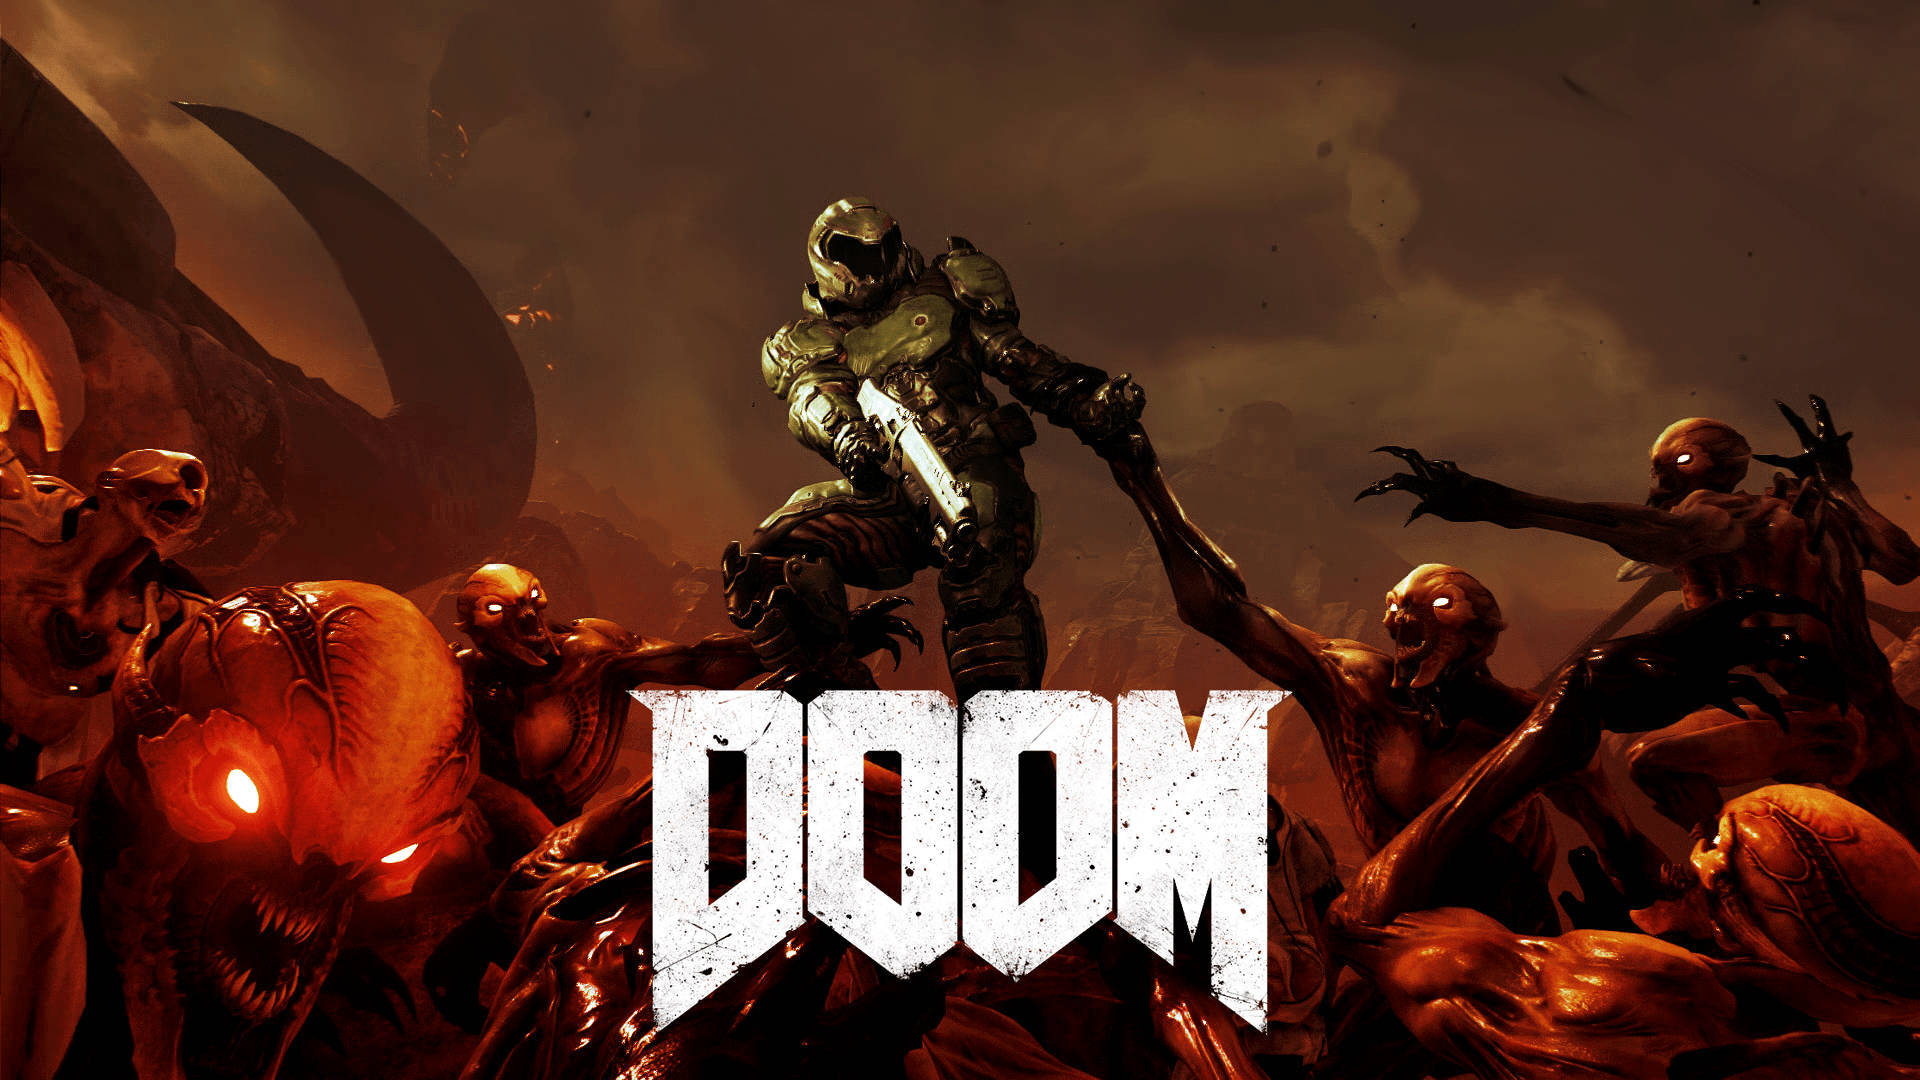 Take on the armies of Hell in Doom! Wallpaper